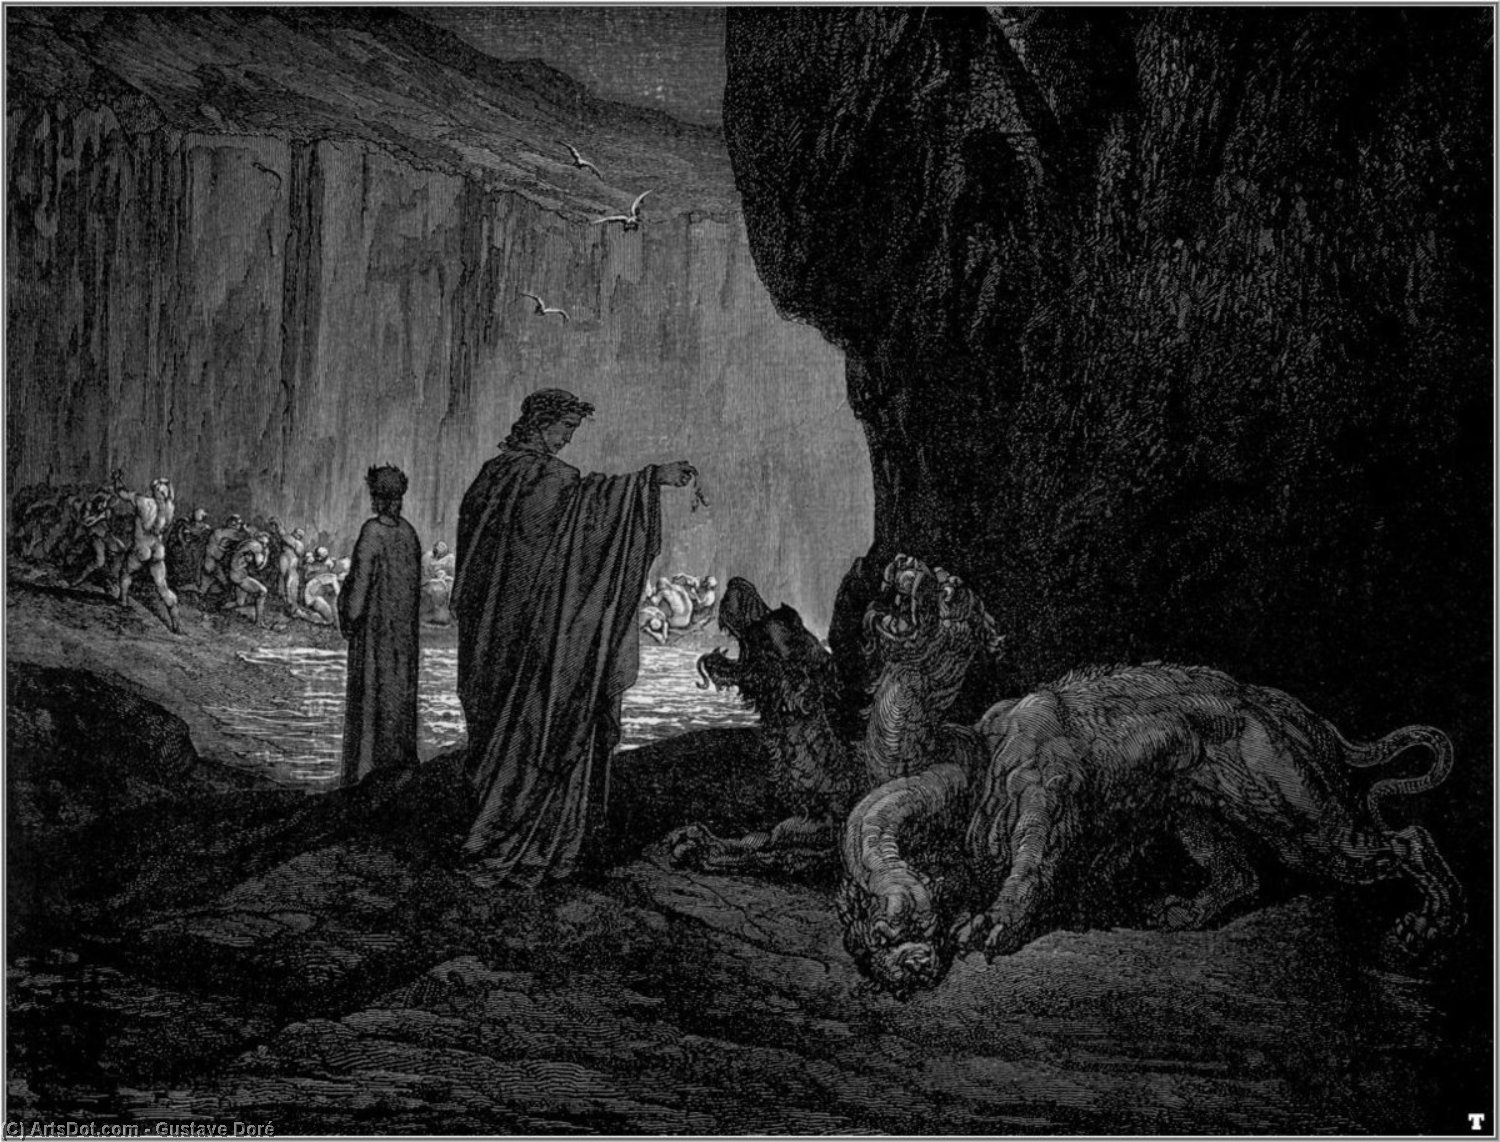 WikiOO.org - Encyclopedia of Fine Arts - Lukisan, Artwork Paul Gustave Doré - The Inferno, Canto 6, lines 24-26. Then my guide, his palms Expanding on the ground, thence filled with earth Rais’d them, and cast it in his ravenous maw.